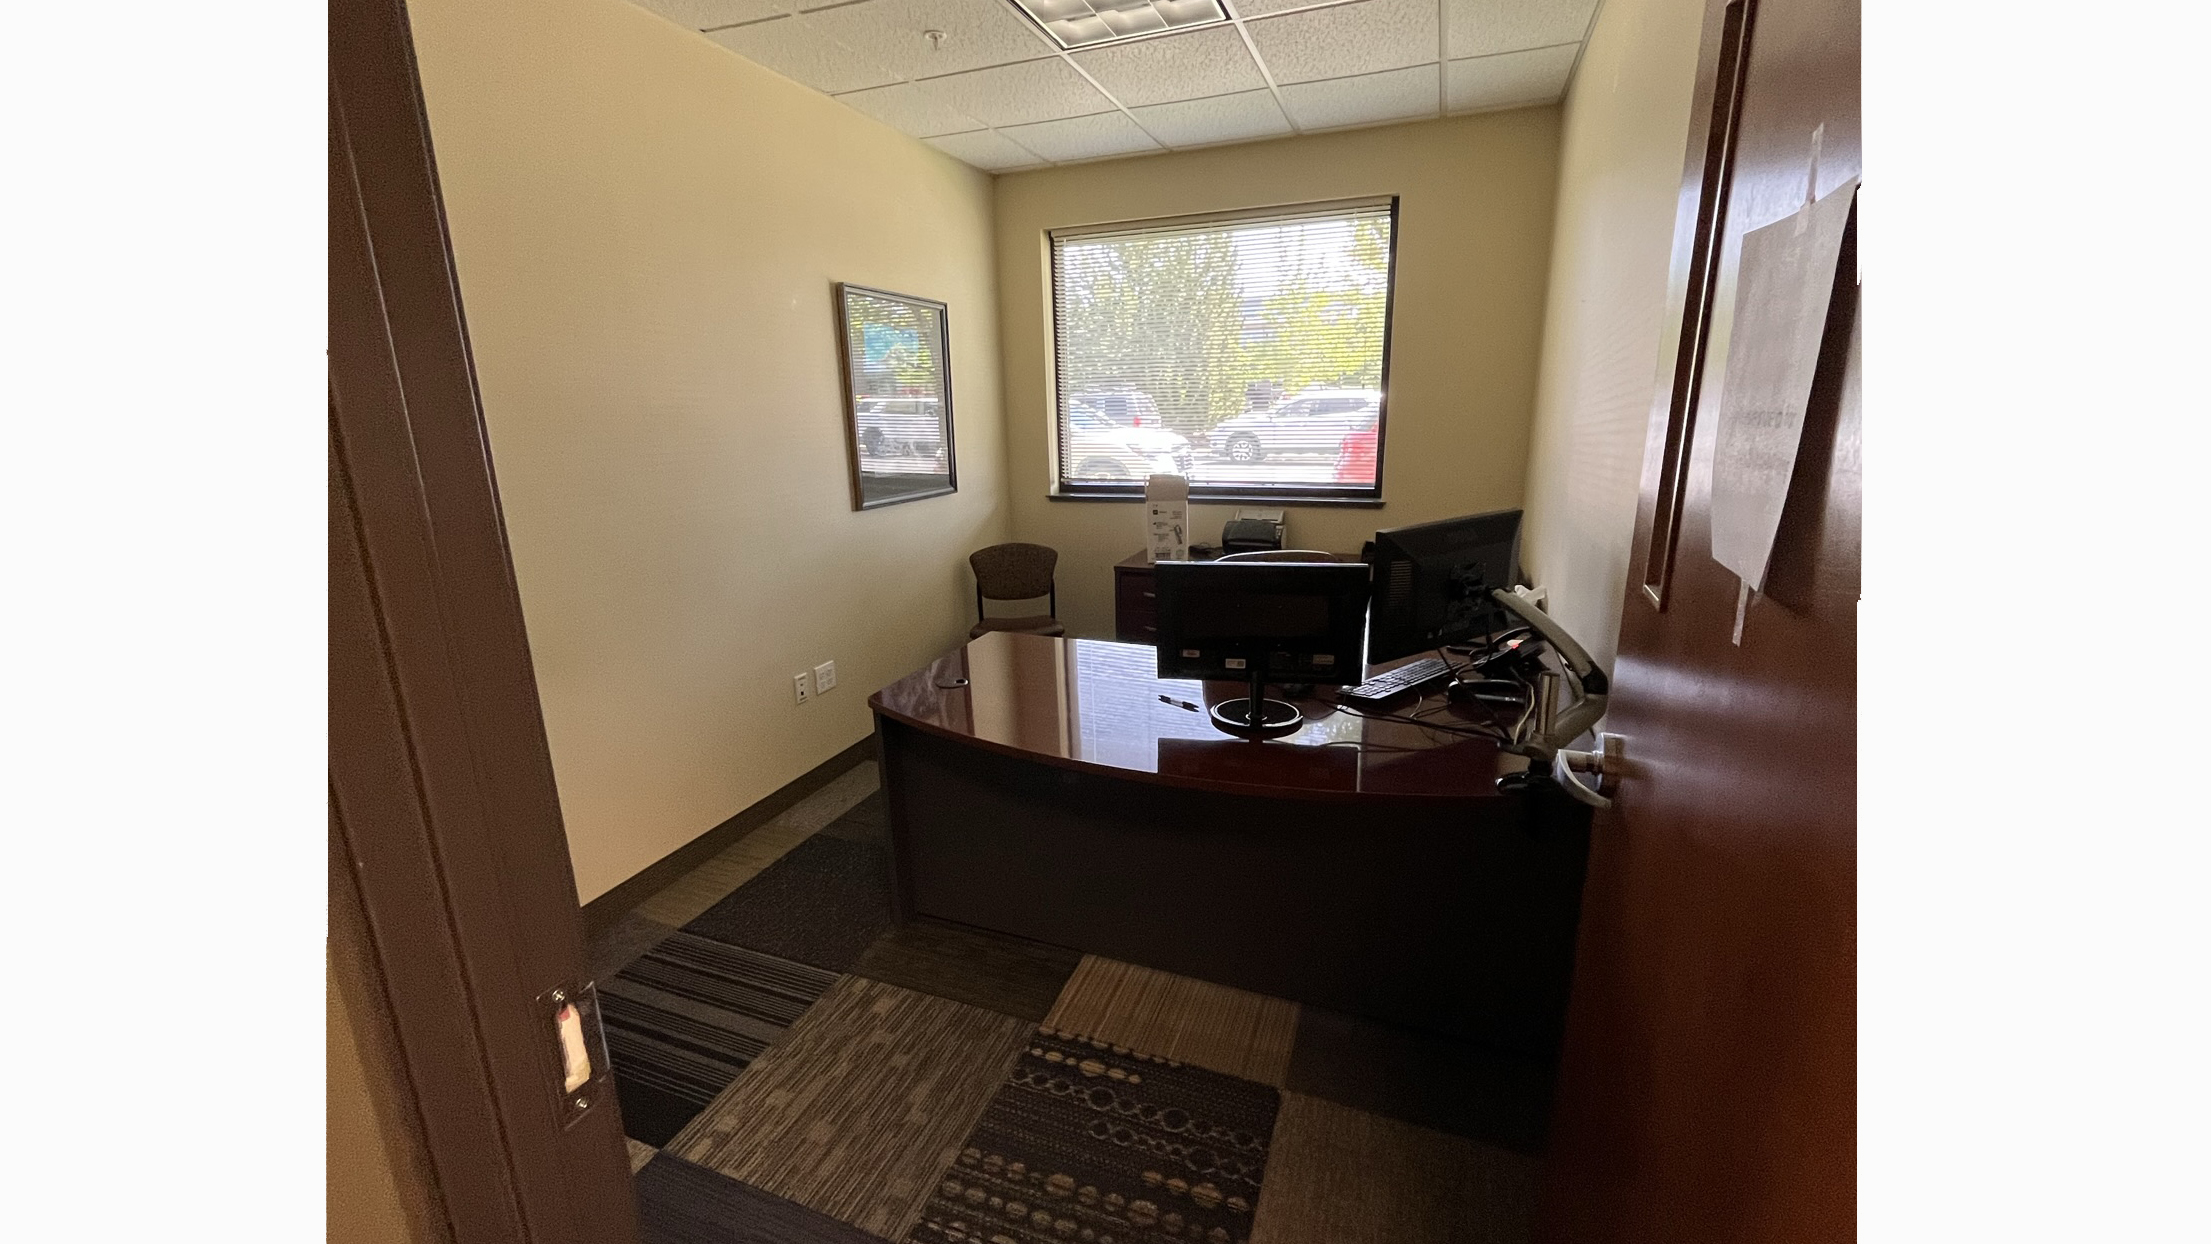 Medical Office building for sublease in Bend, OR